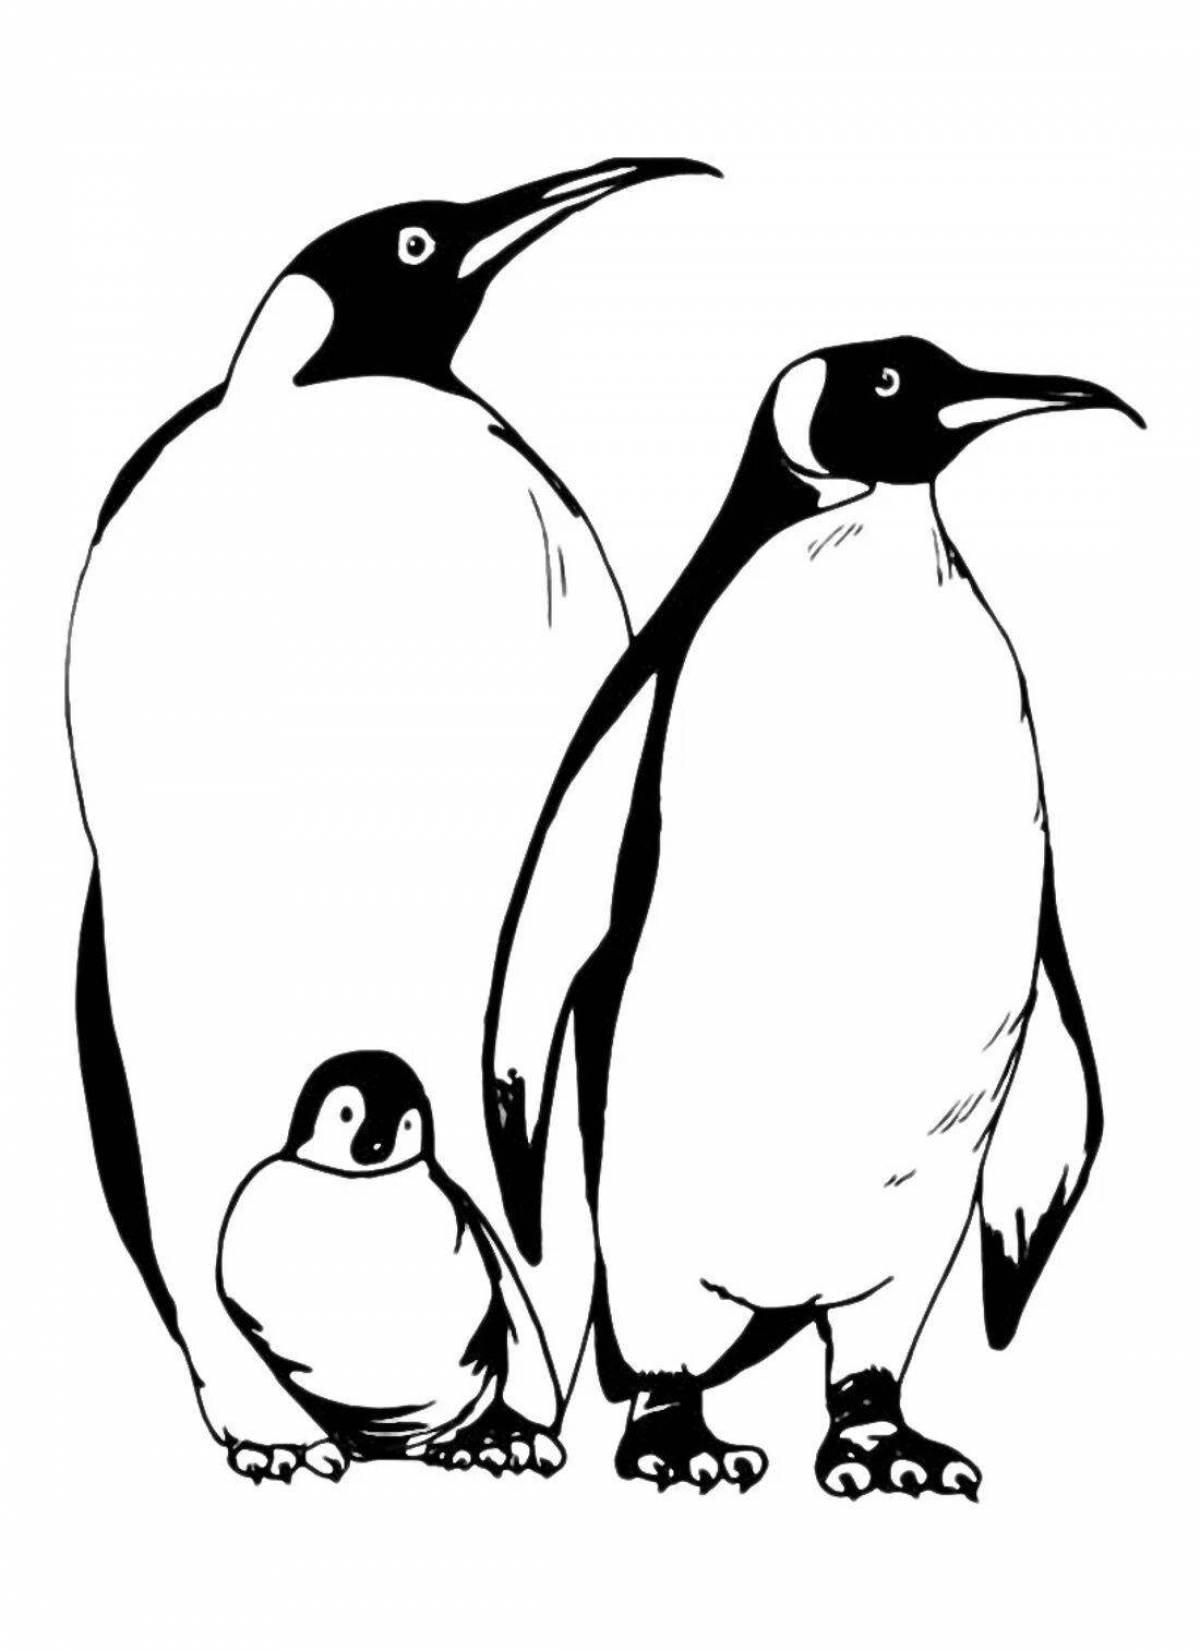 Naughty penguin family coloring page